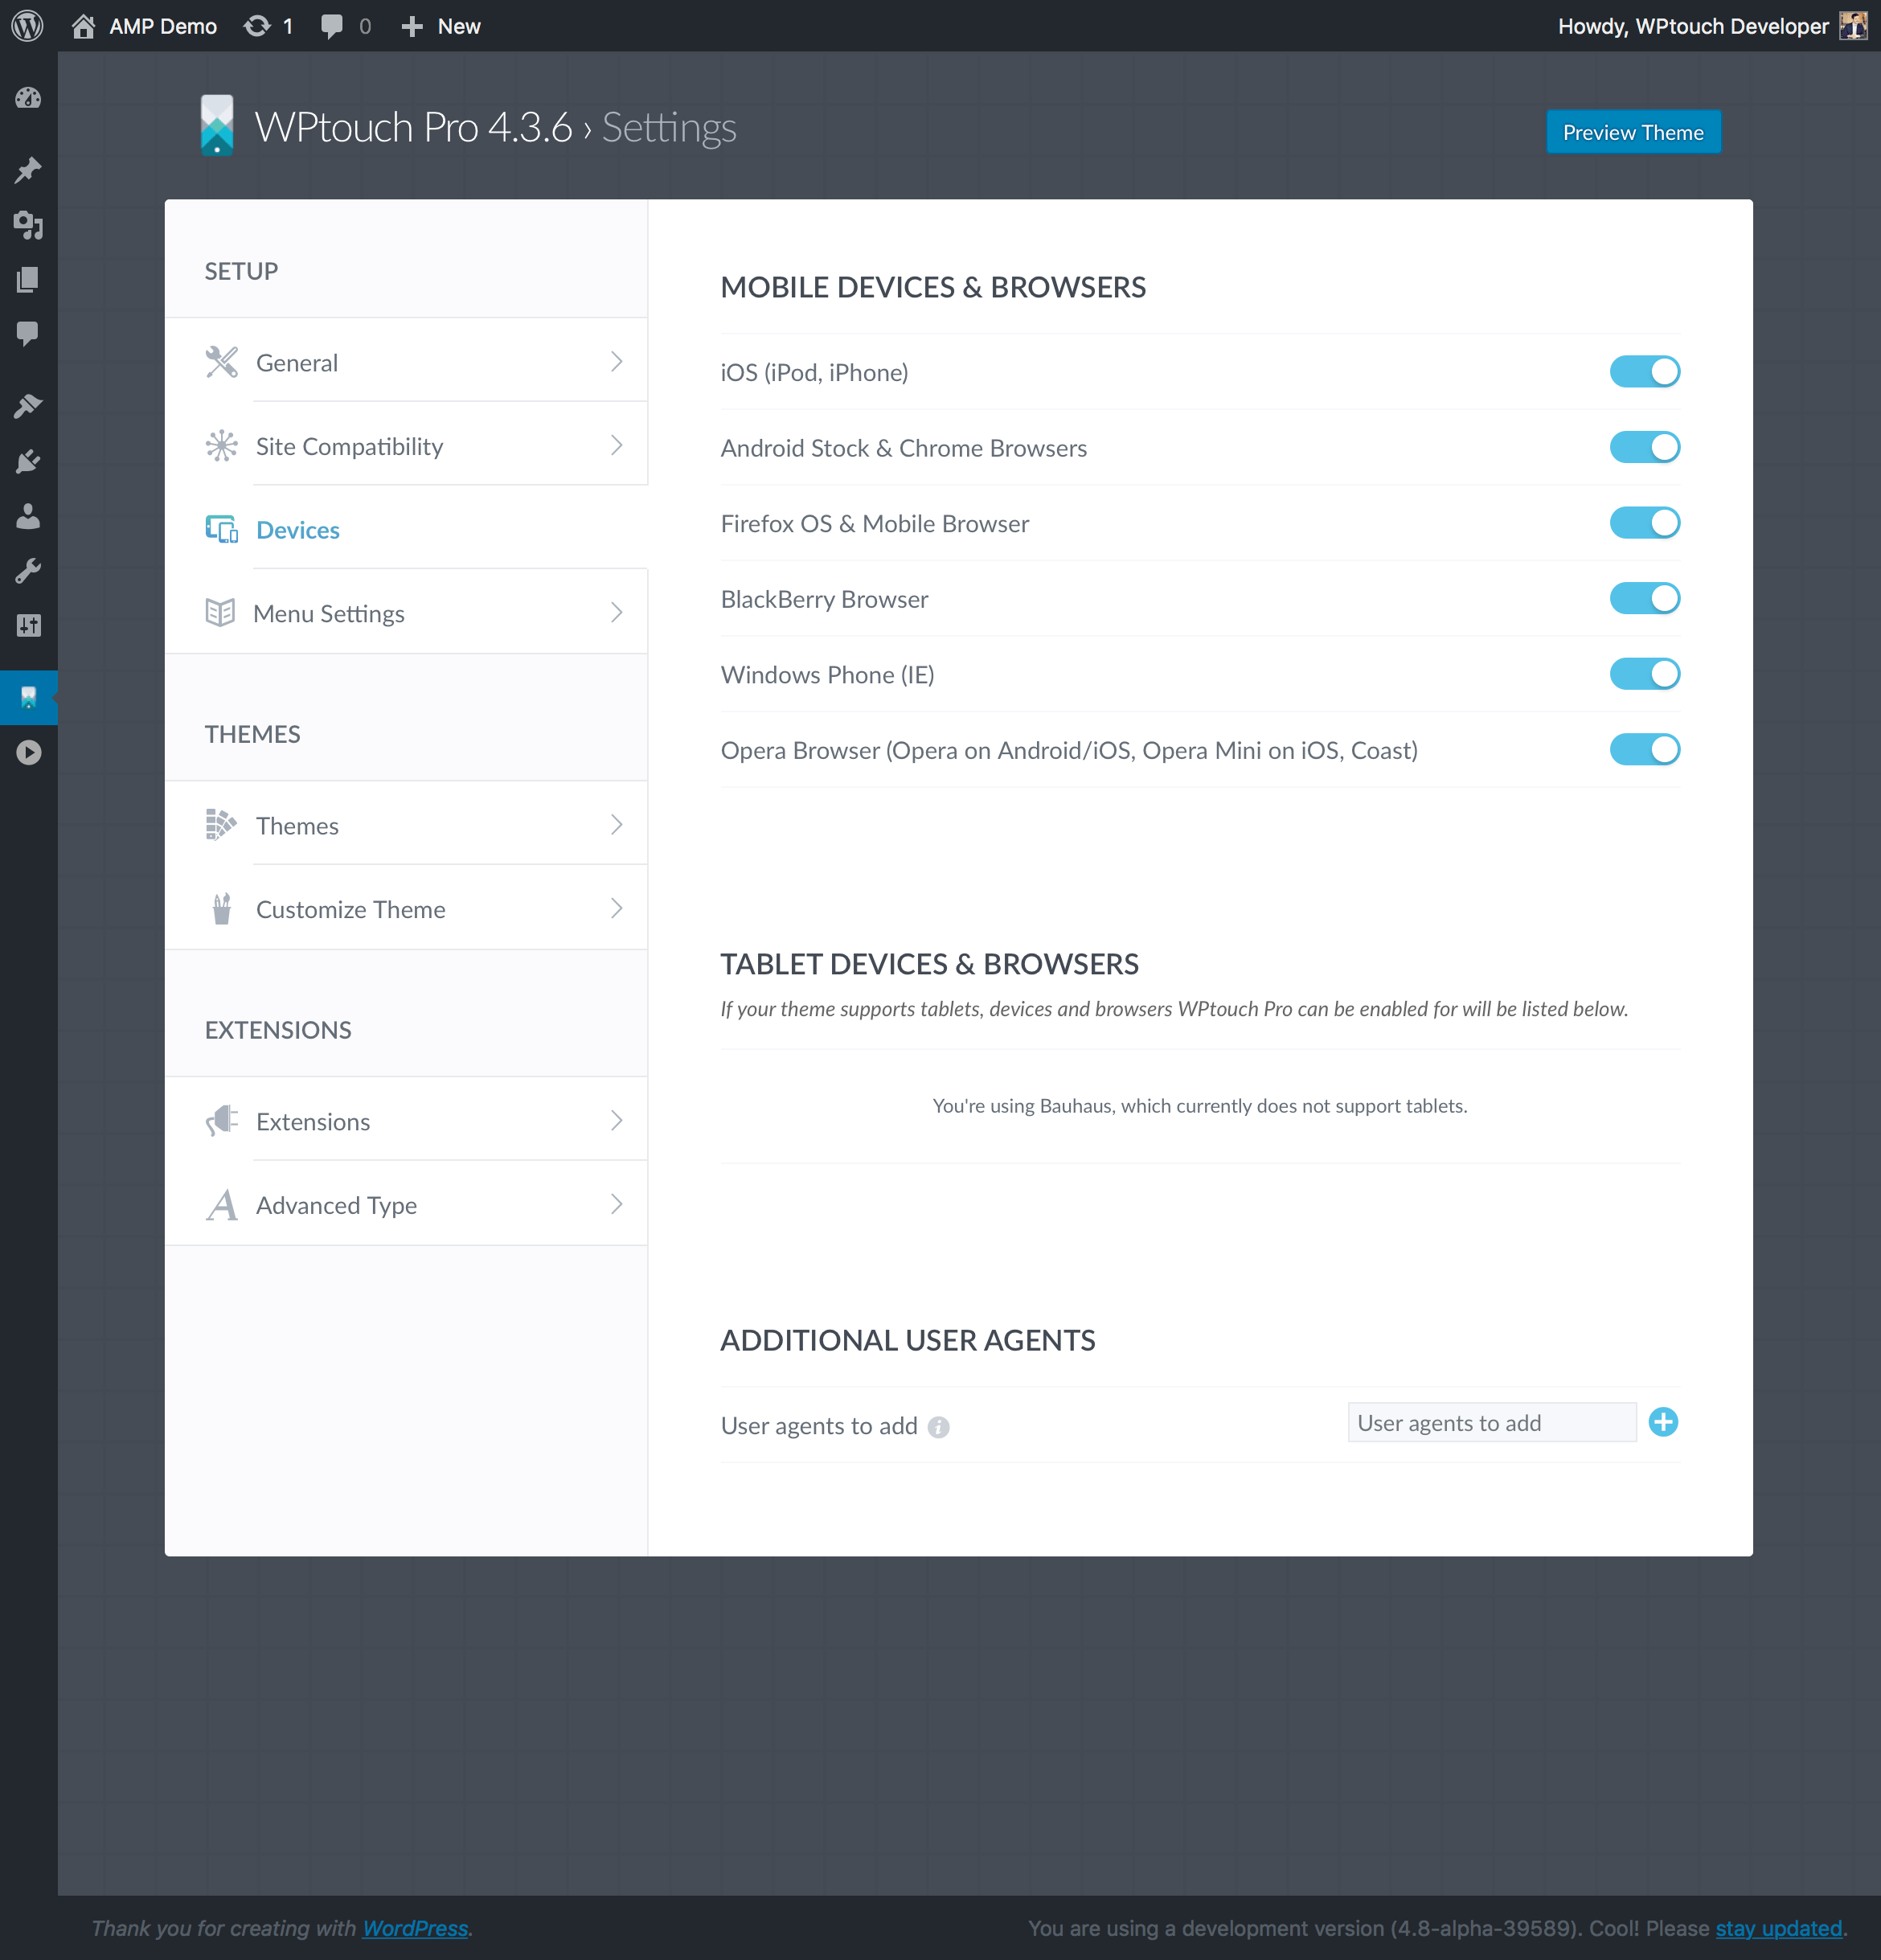 Devices options - WPtouch settings panel.